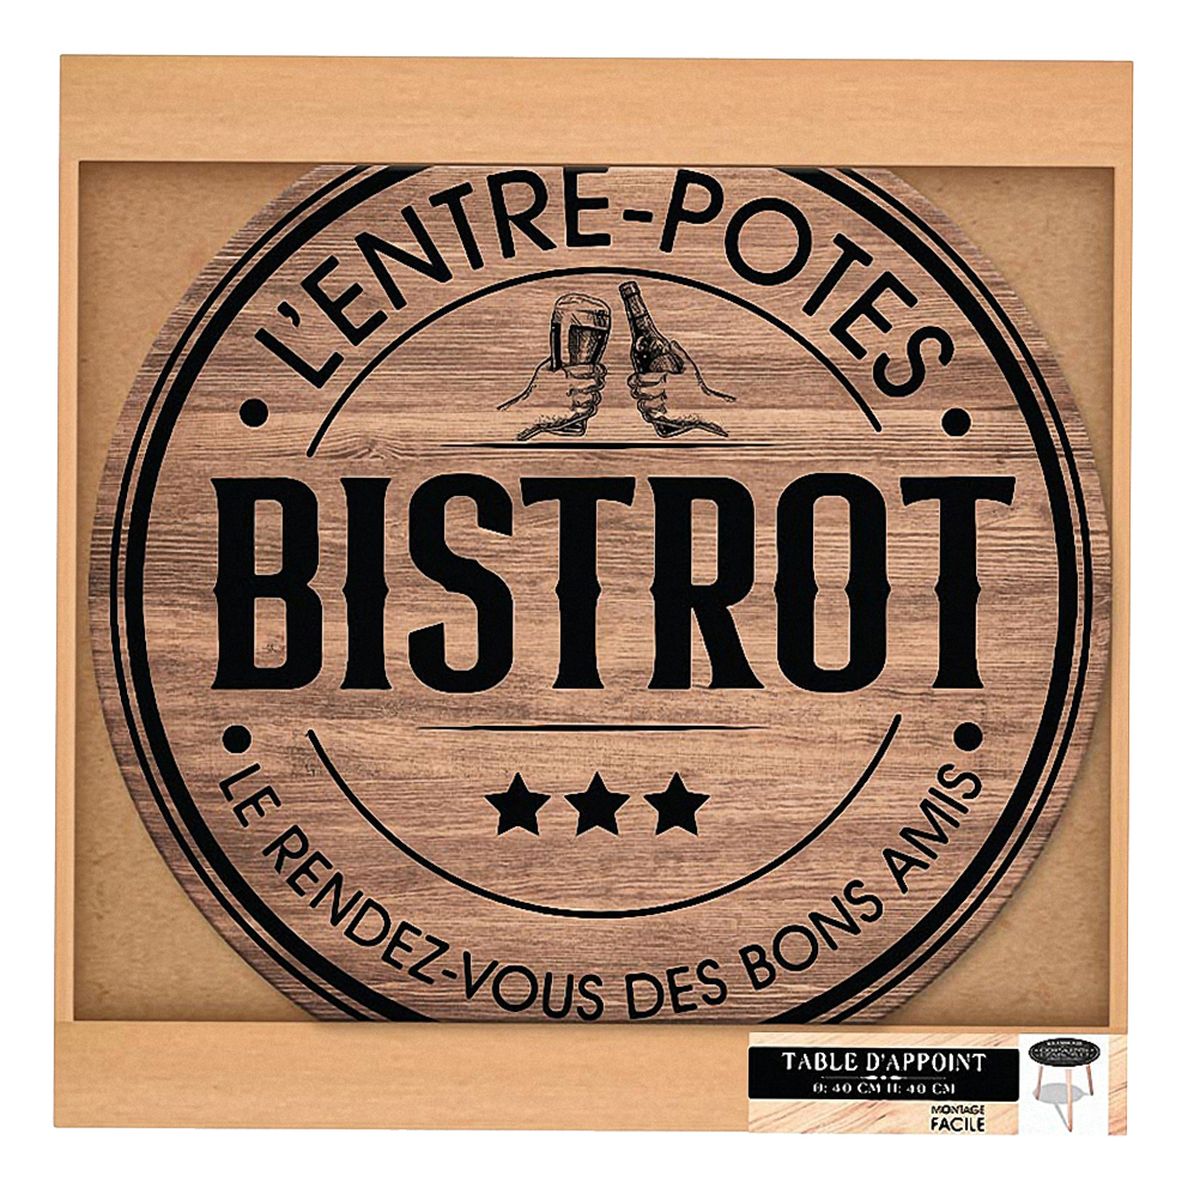 Table d'appoint Motif BISTROT